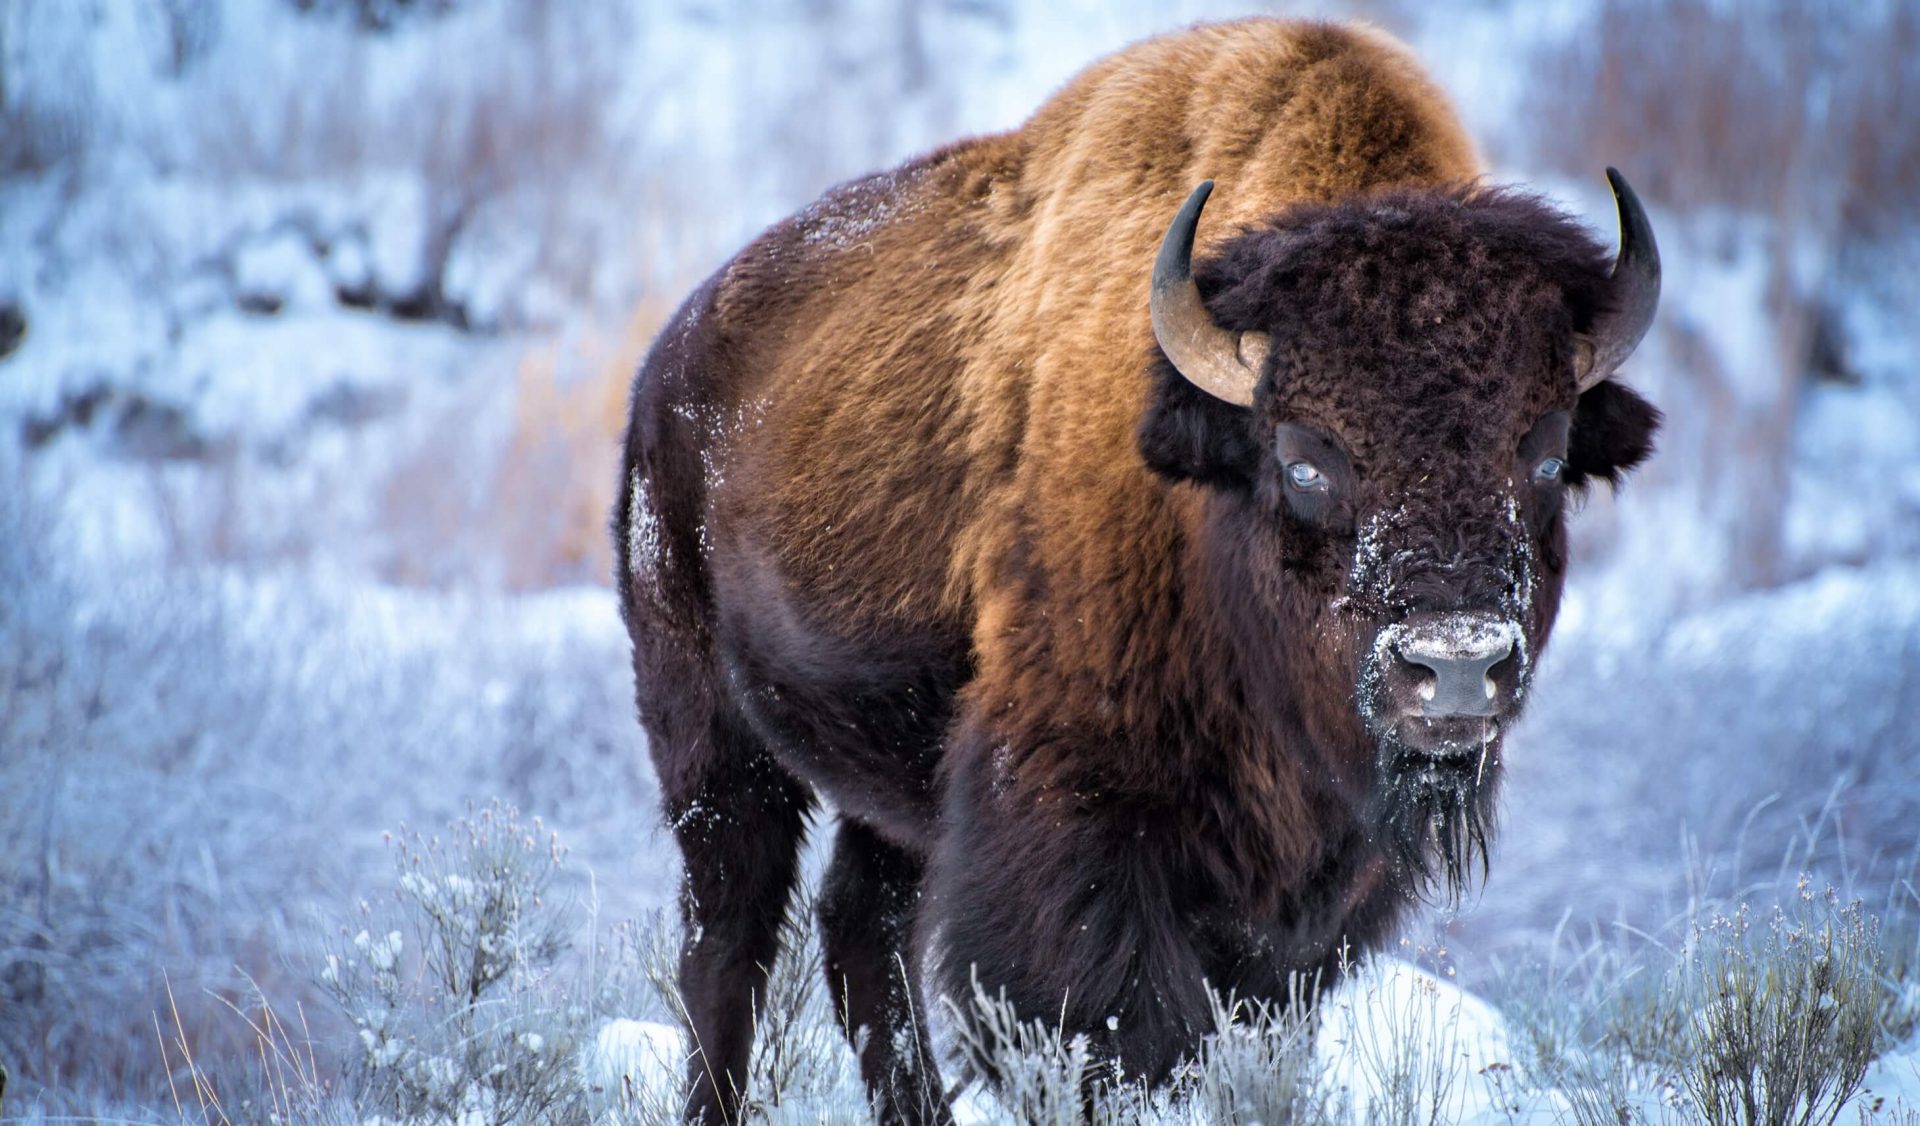 Adult bison in front of winterscape